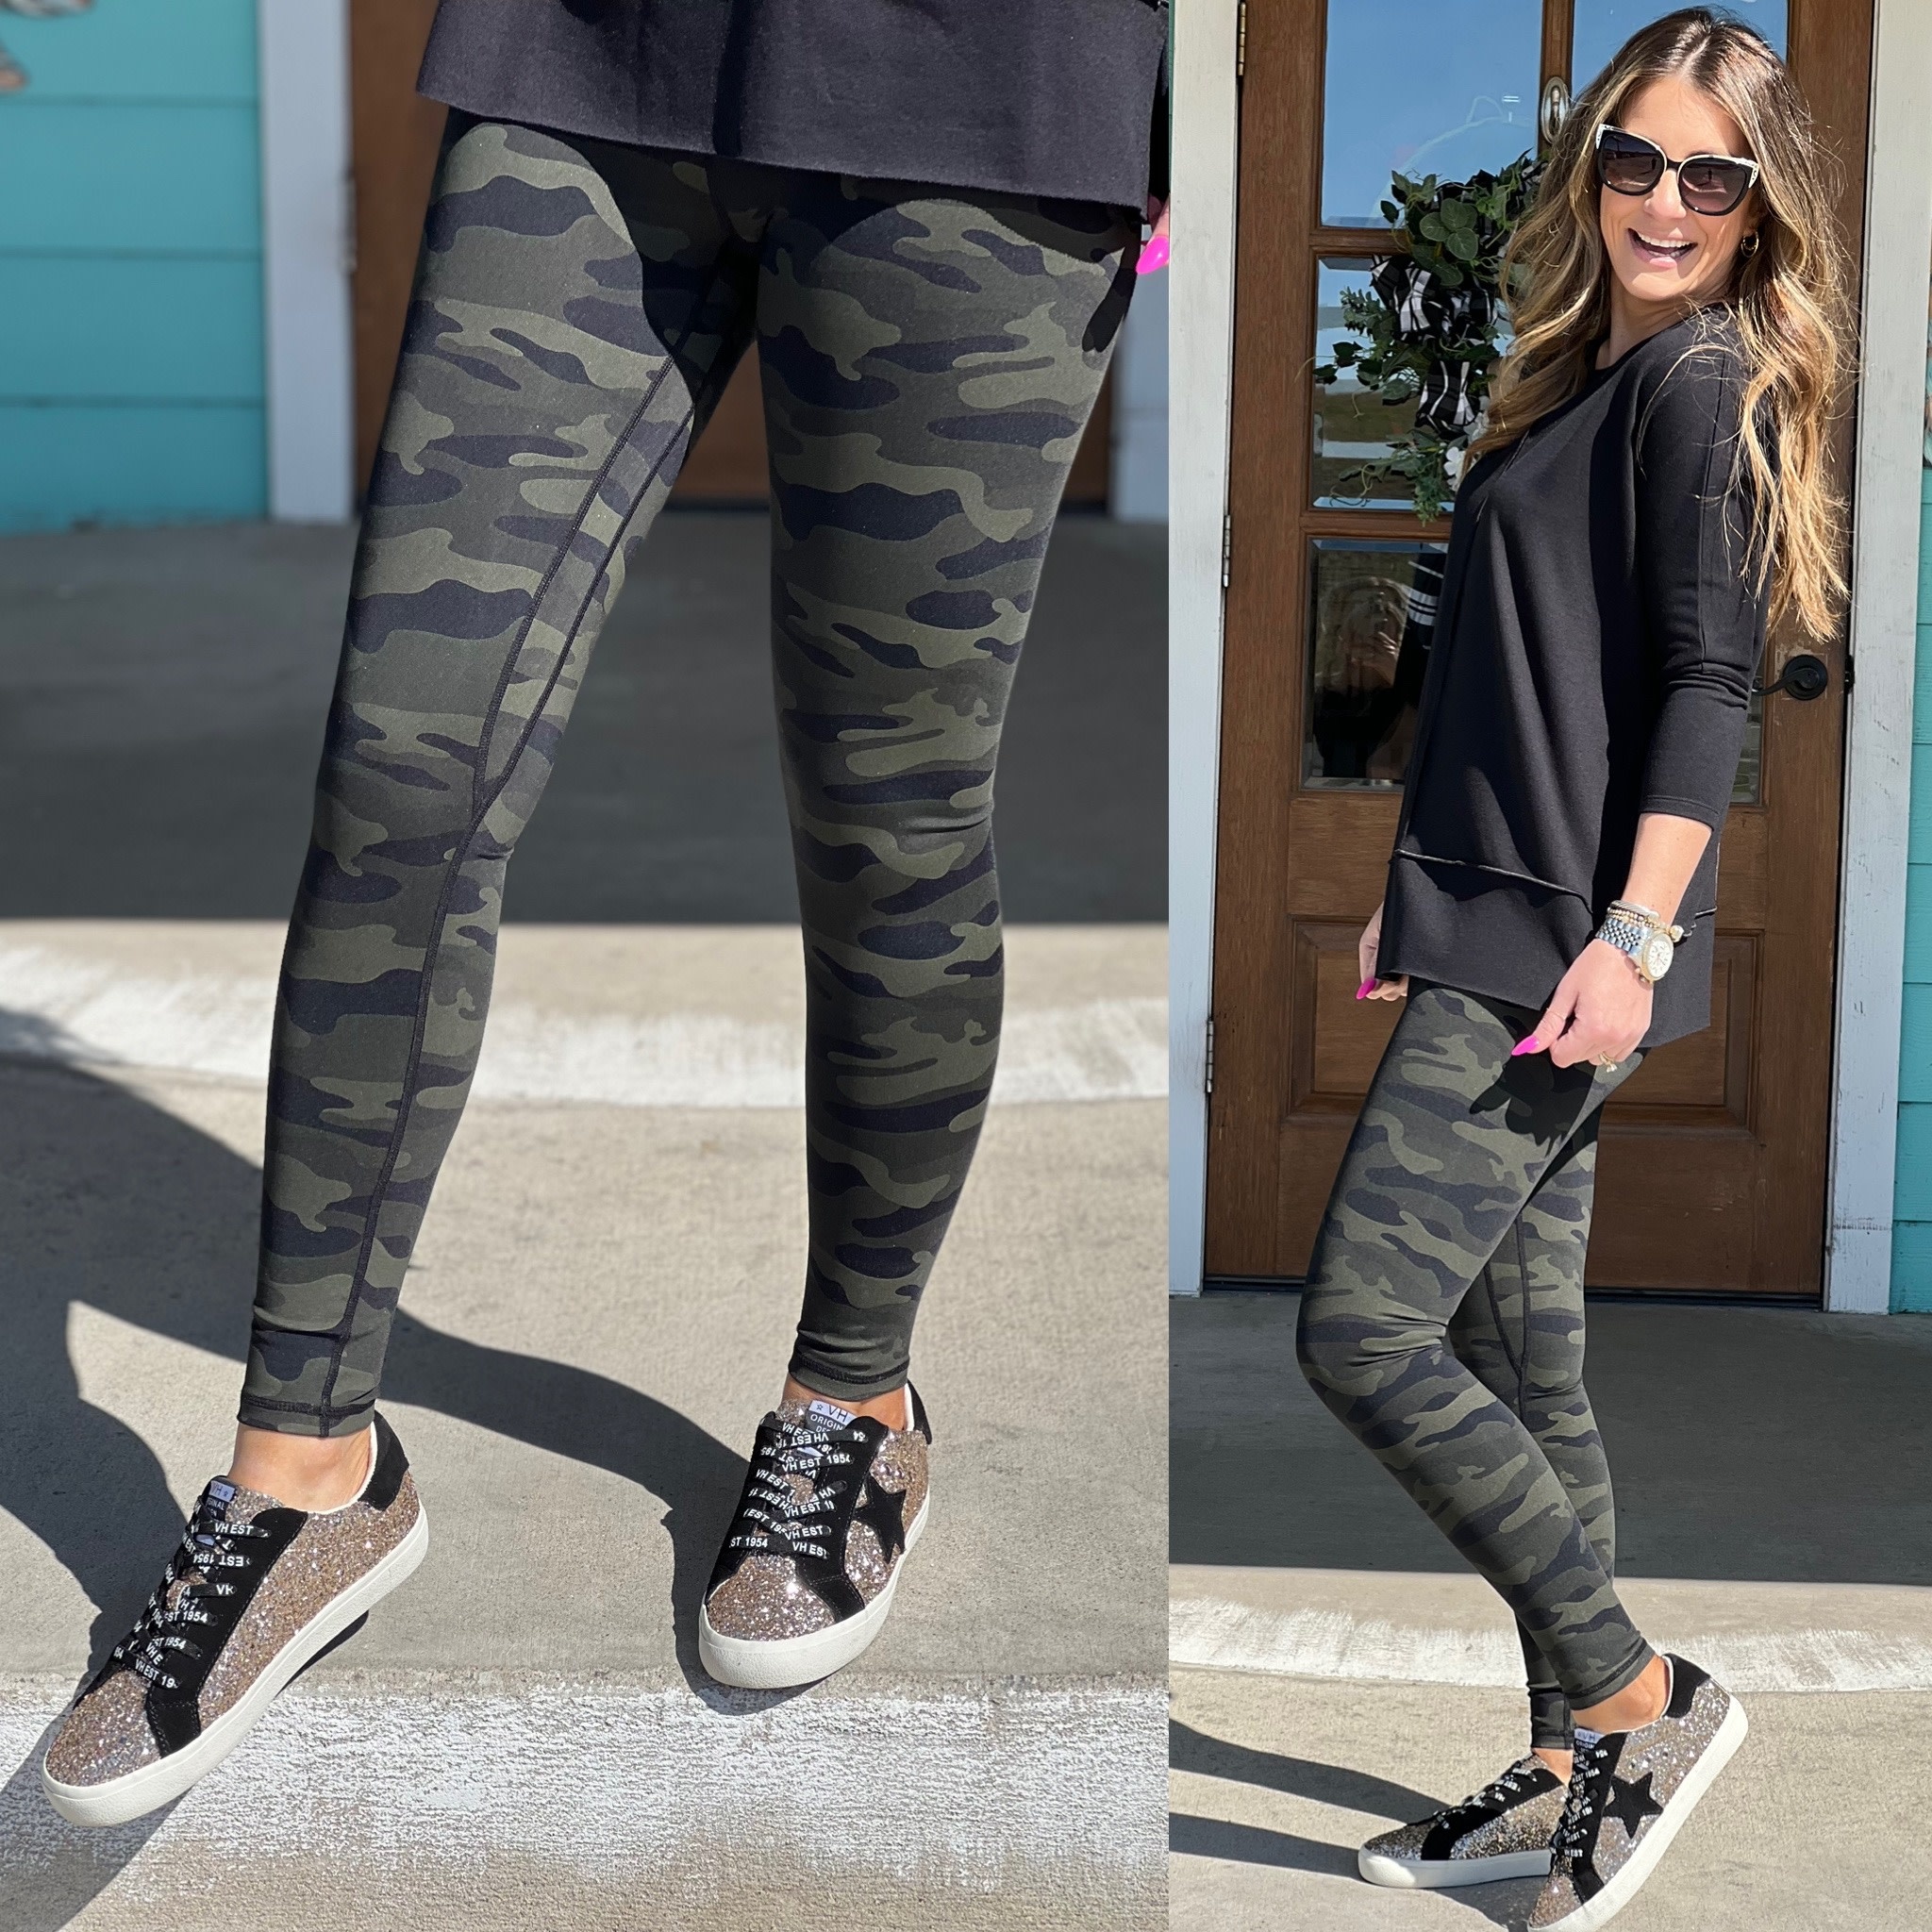 camo leggings outfit, thermal top outfit, athleisure wear, cozy | Outfits  with leggings, Camo leggings outfit, Sporty outfits